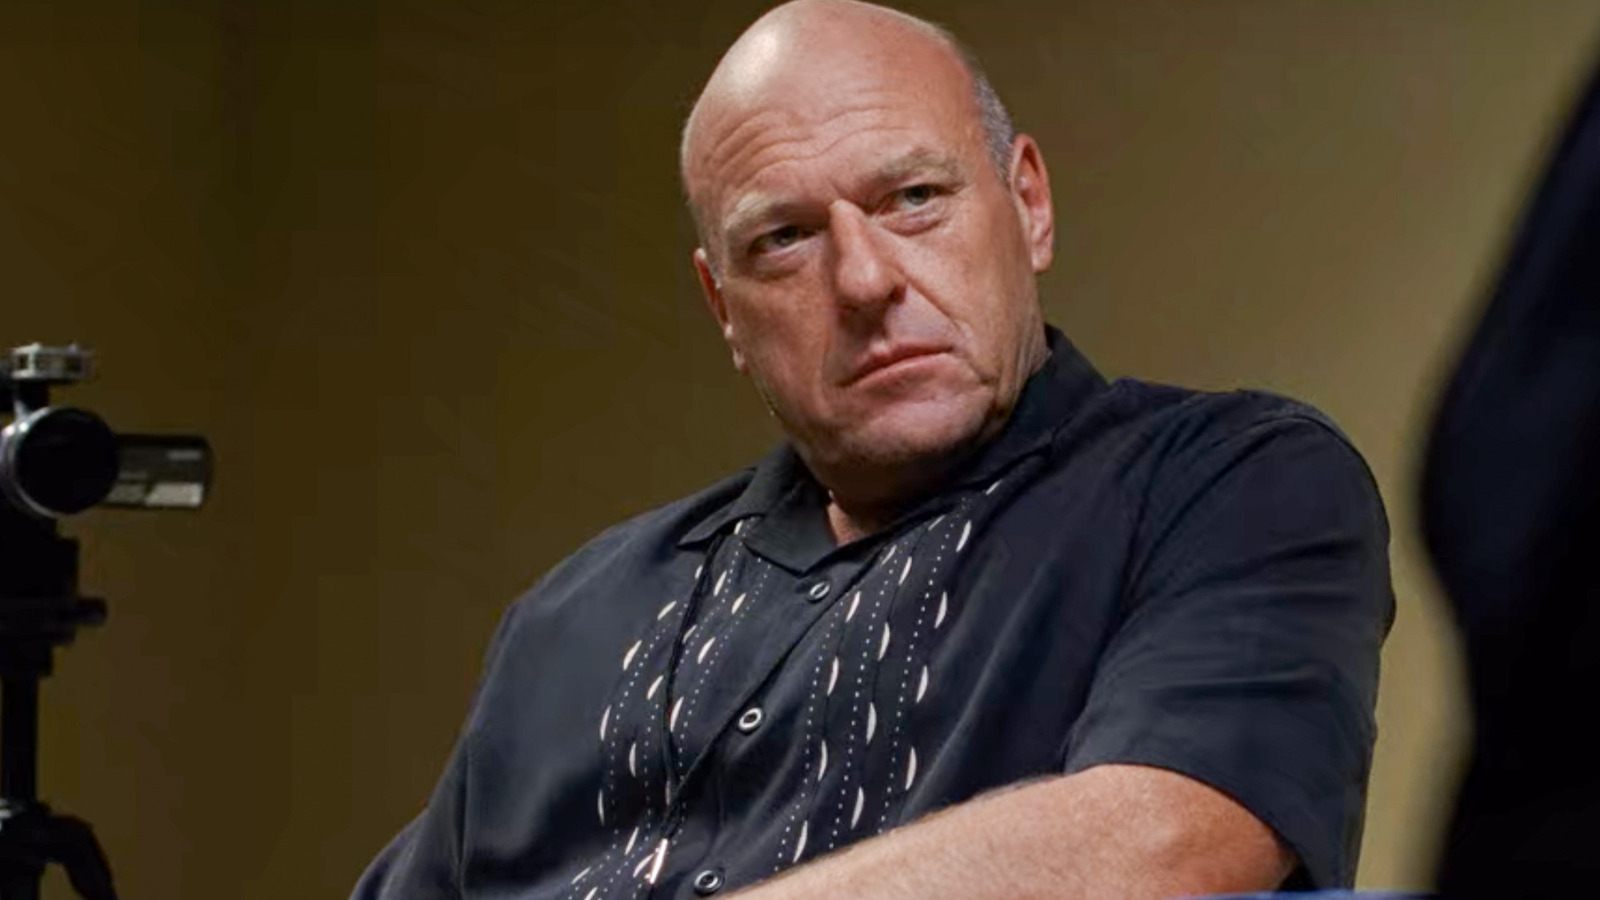 Dina's dad is played by dean norris. The same actor as hank in breaking  bad! : r/superstore